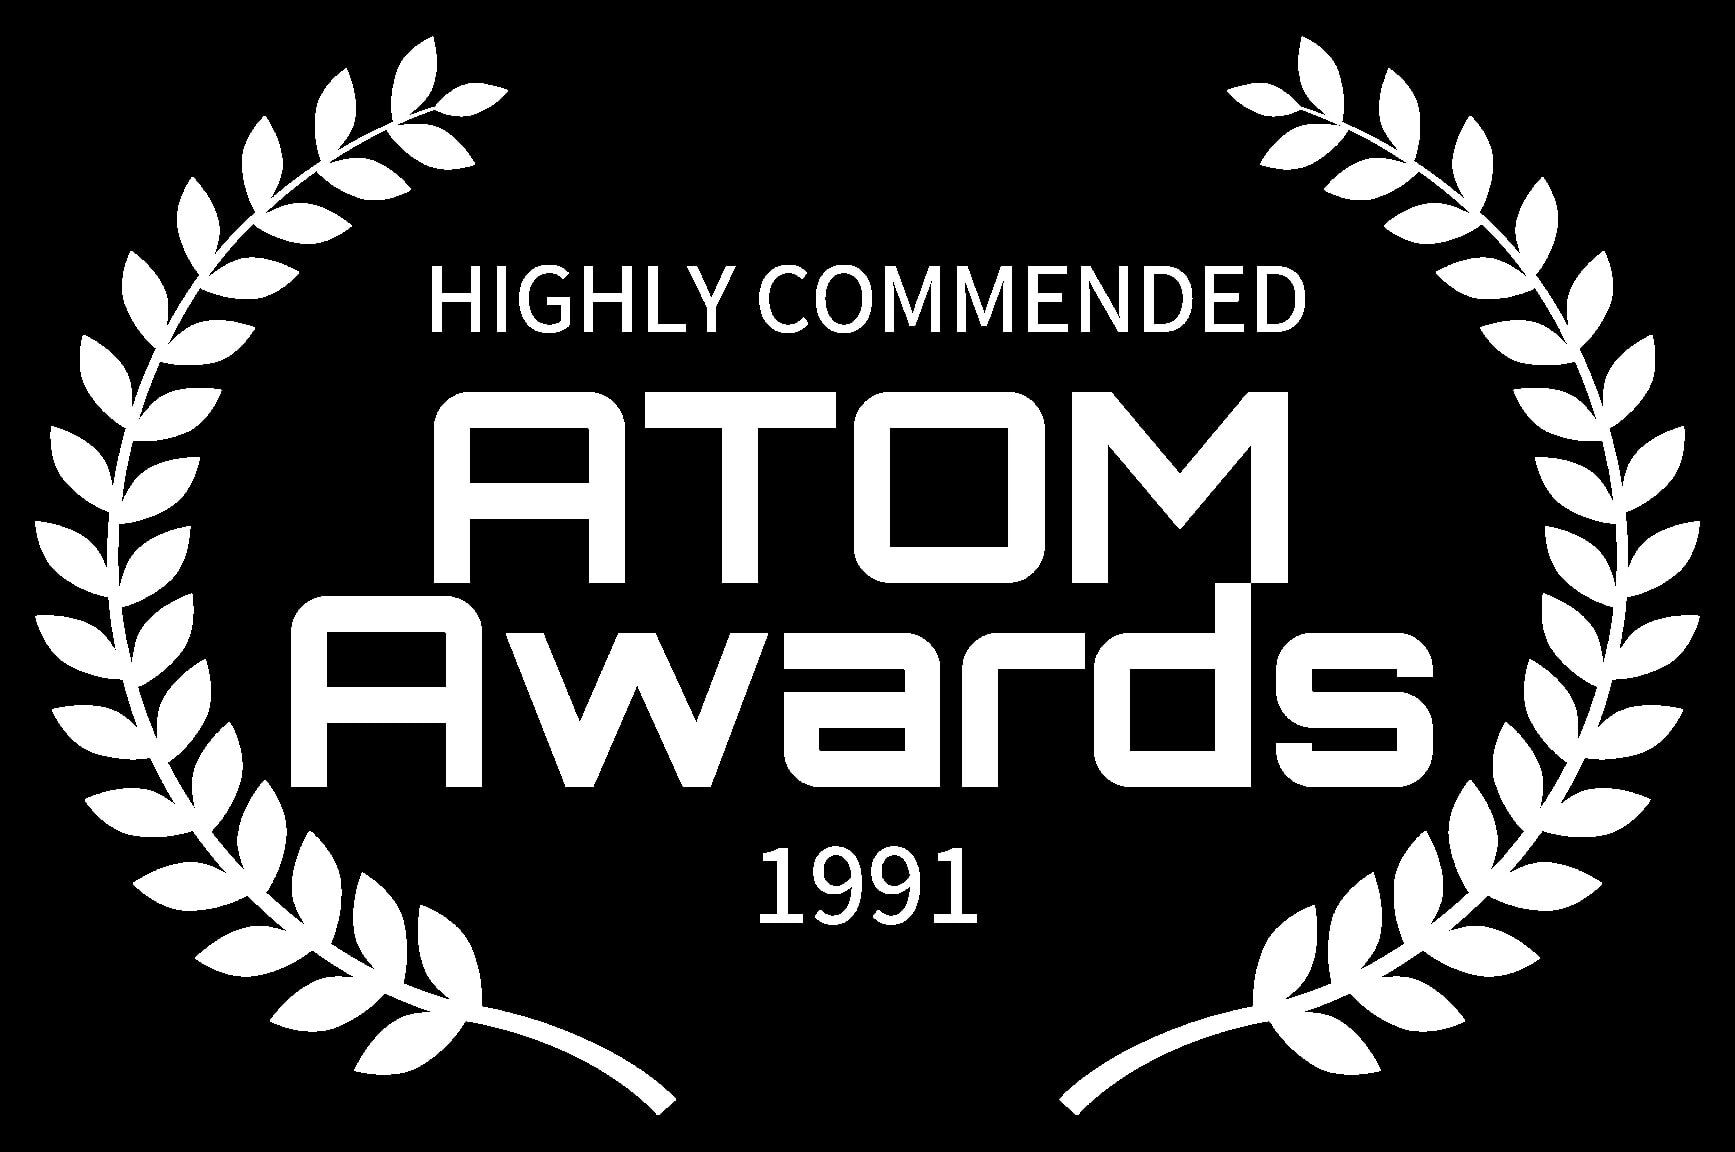 HIGHLY COMMENDED - ATOM Awards - 1991 - THE DILEMMA